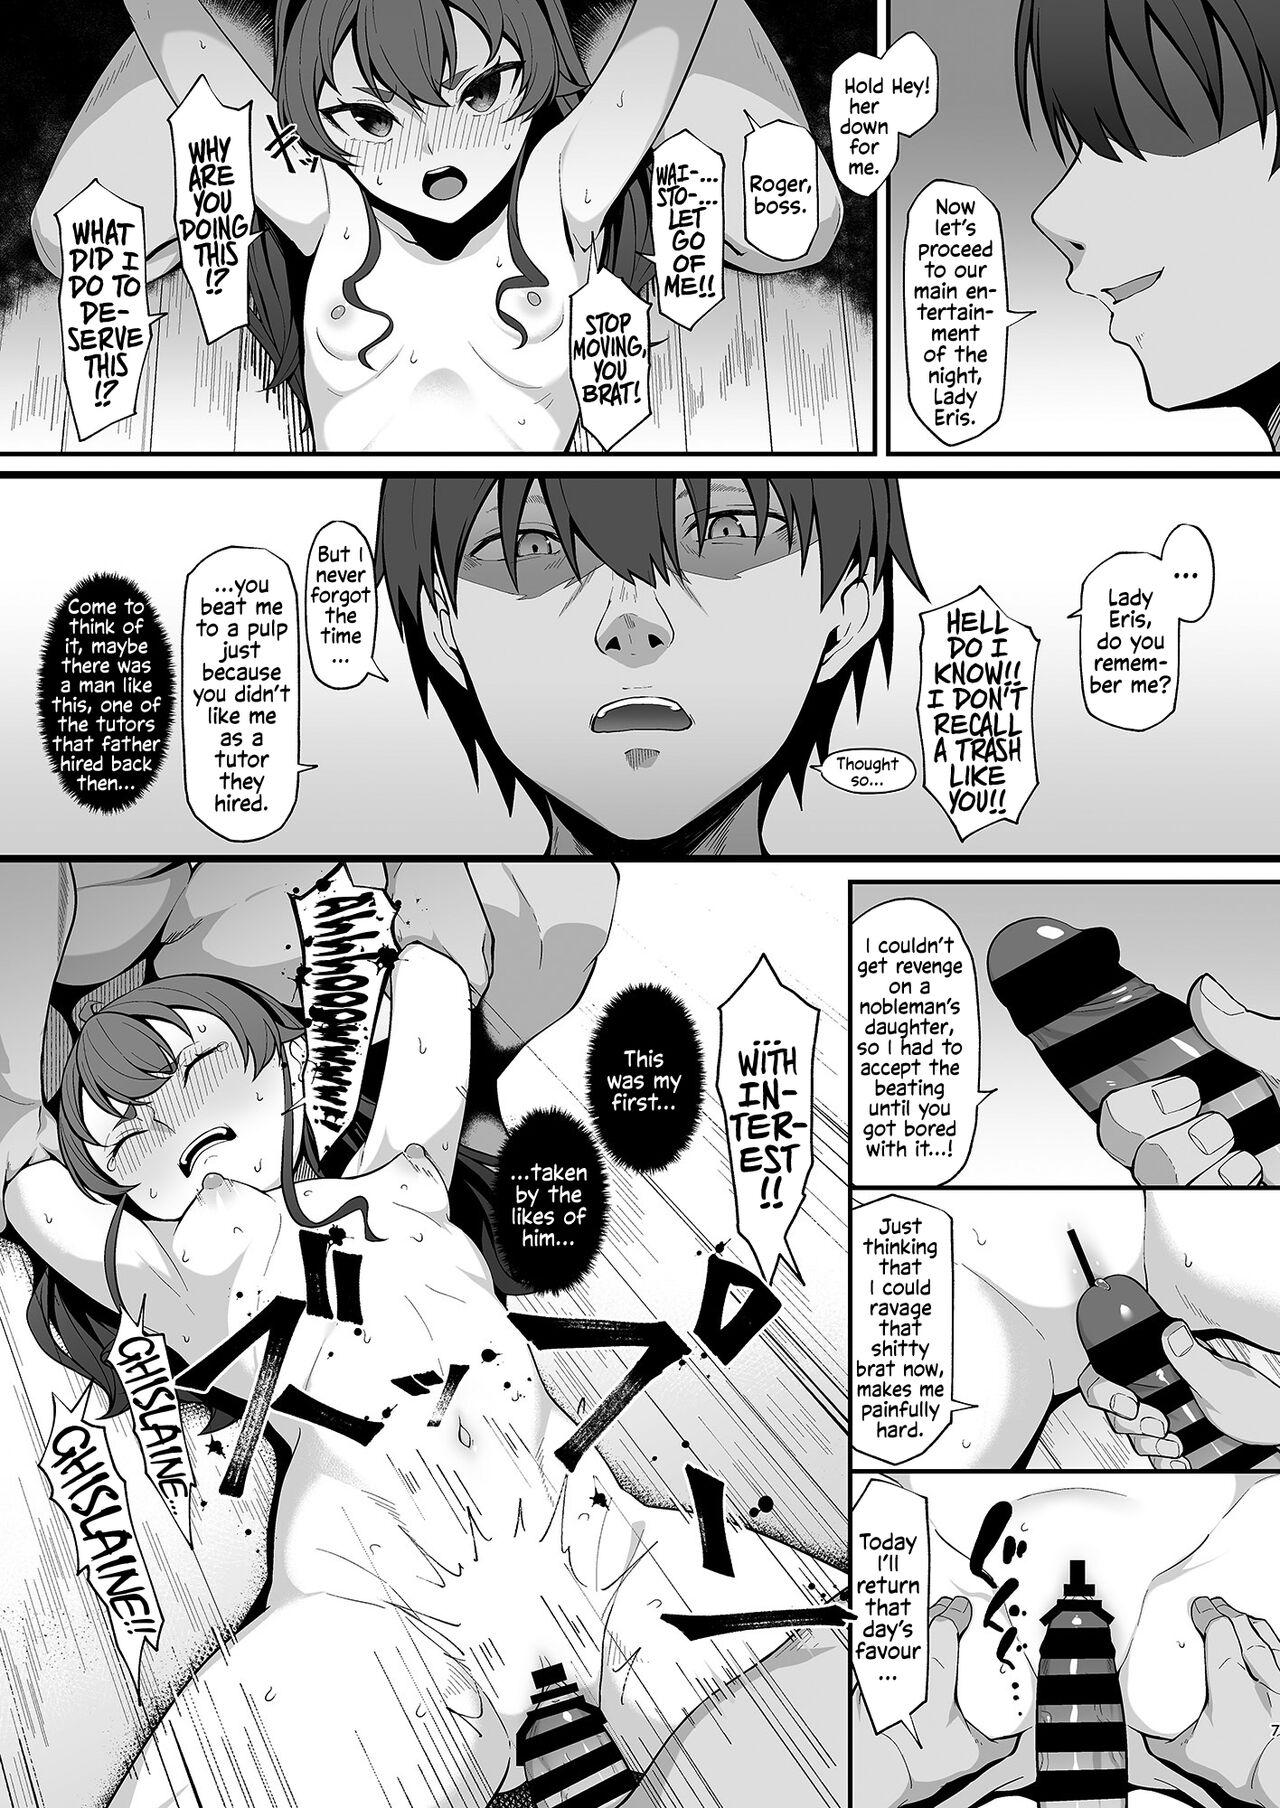 Tight You reap what you sow, Lady Eris + Omake - Mushoku tensei Sister - Page 6